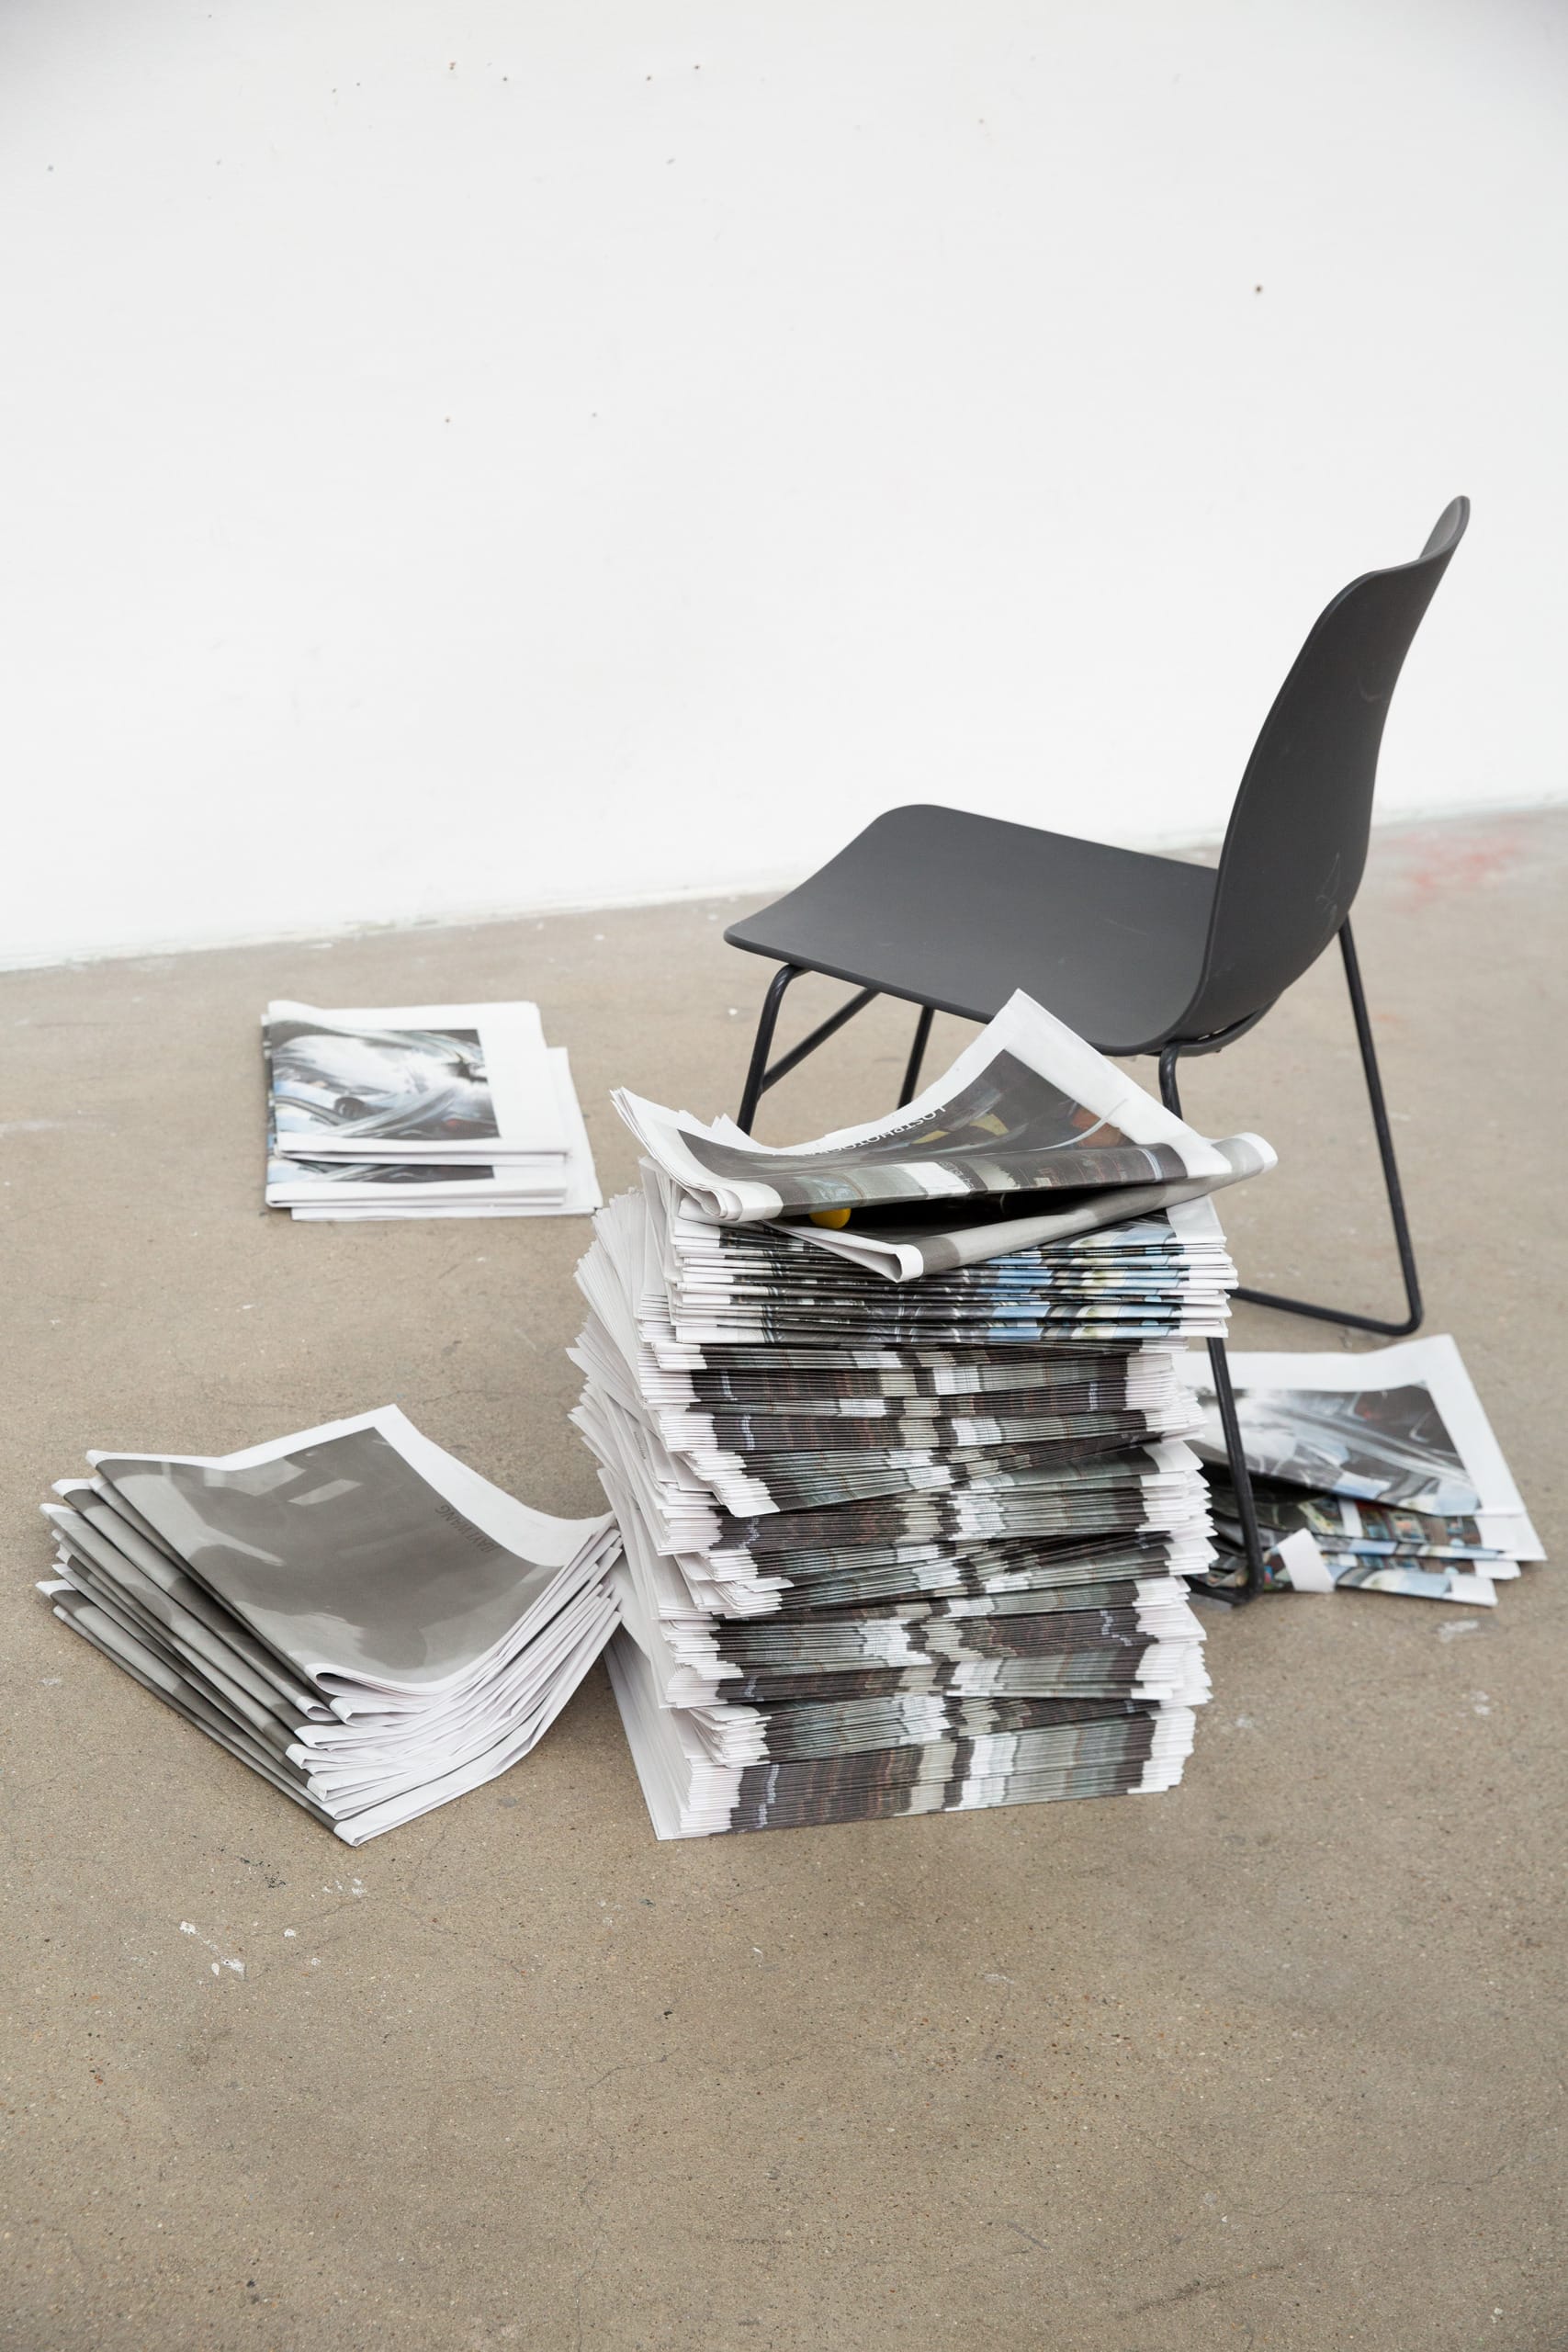 newspapers and a chair